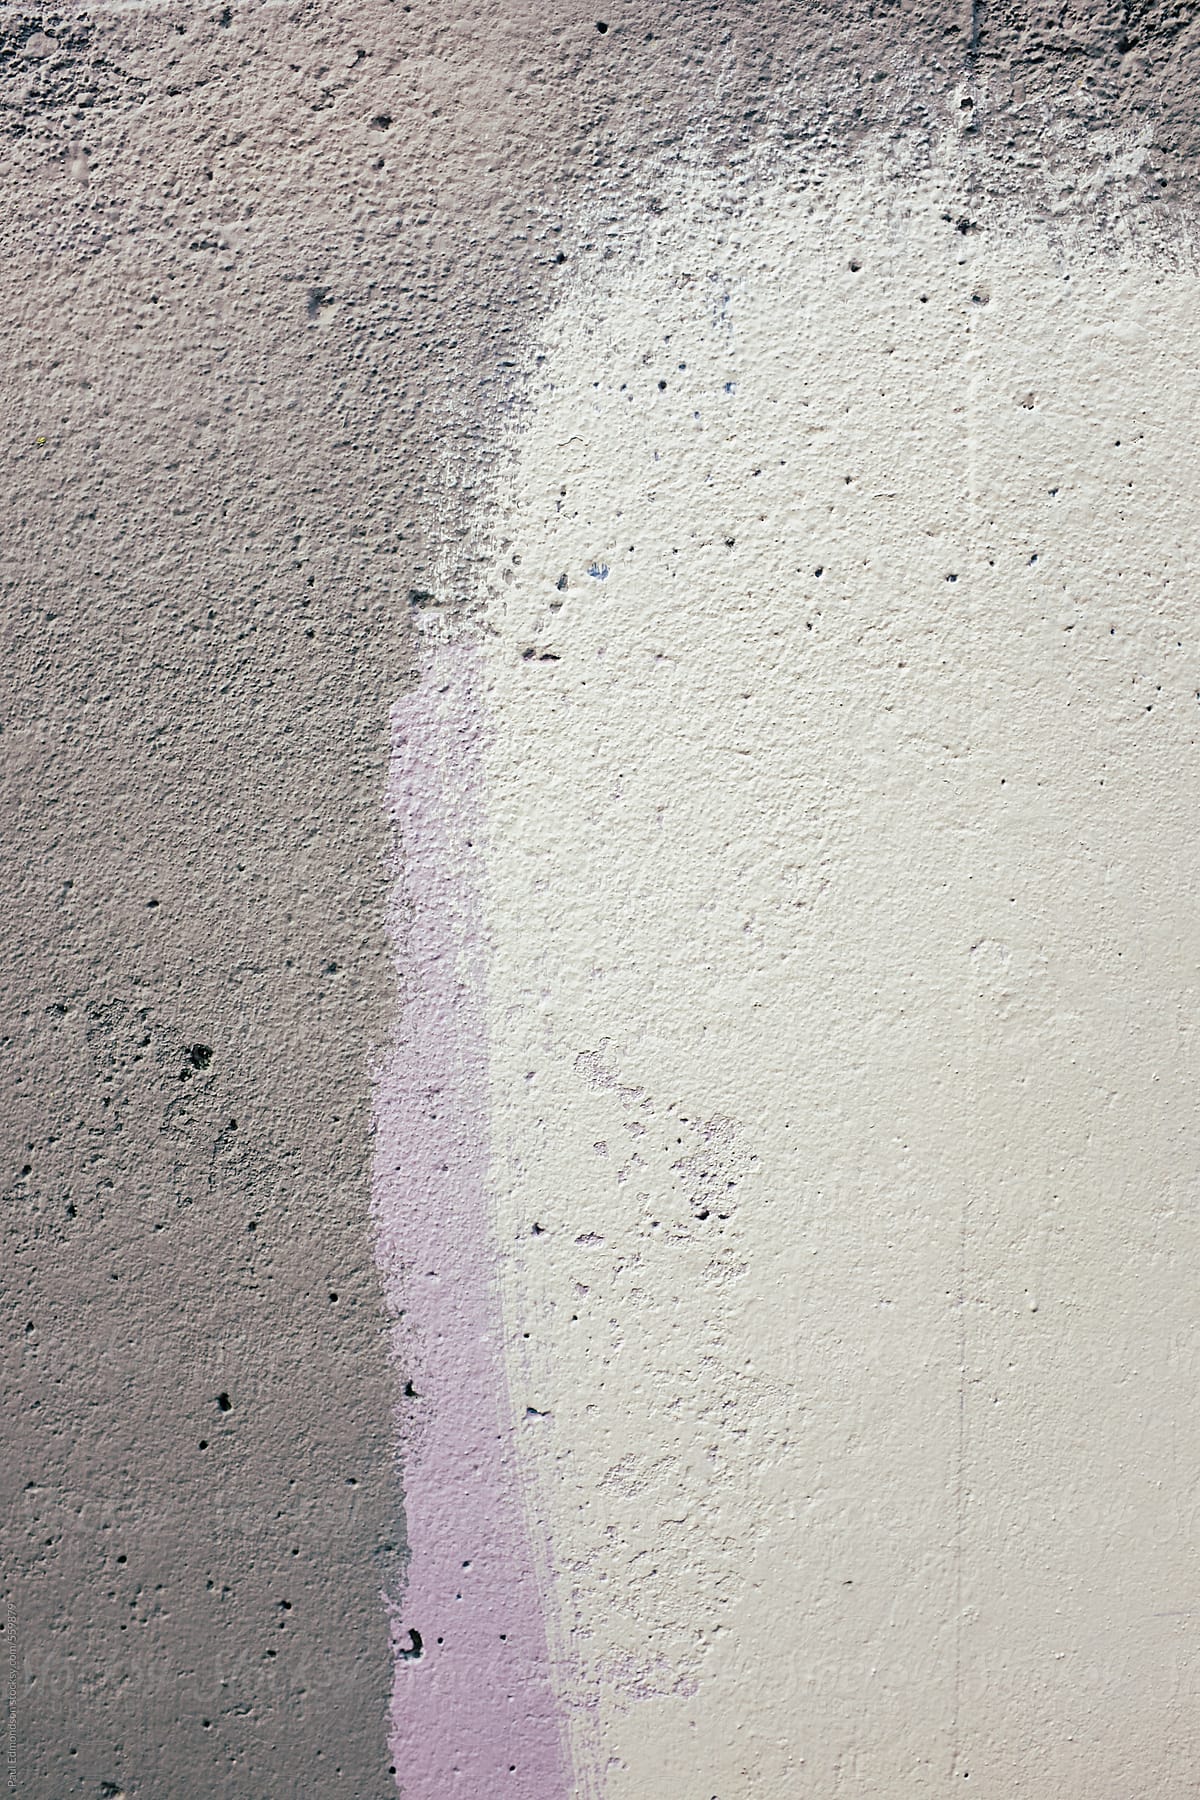 Paint covering graffiti on building wall, close up